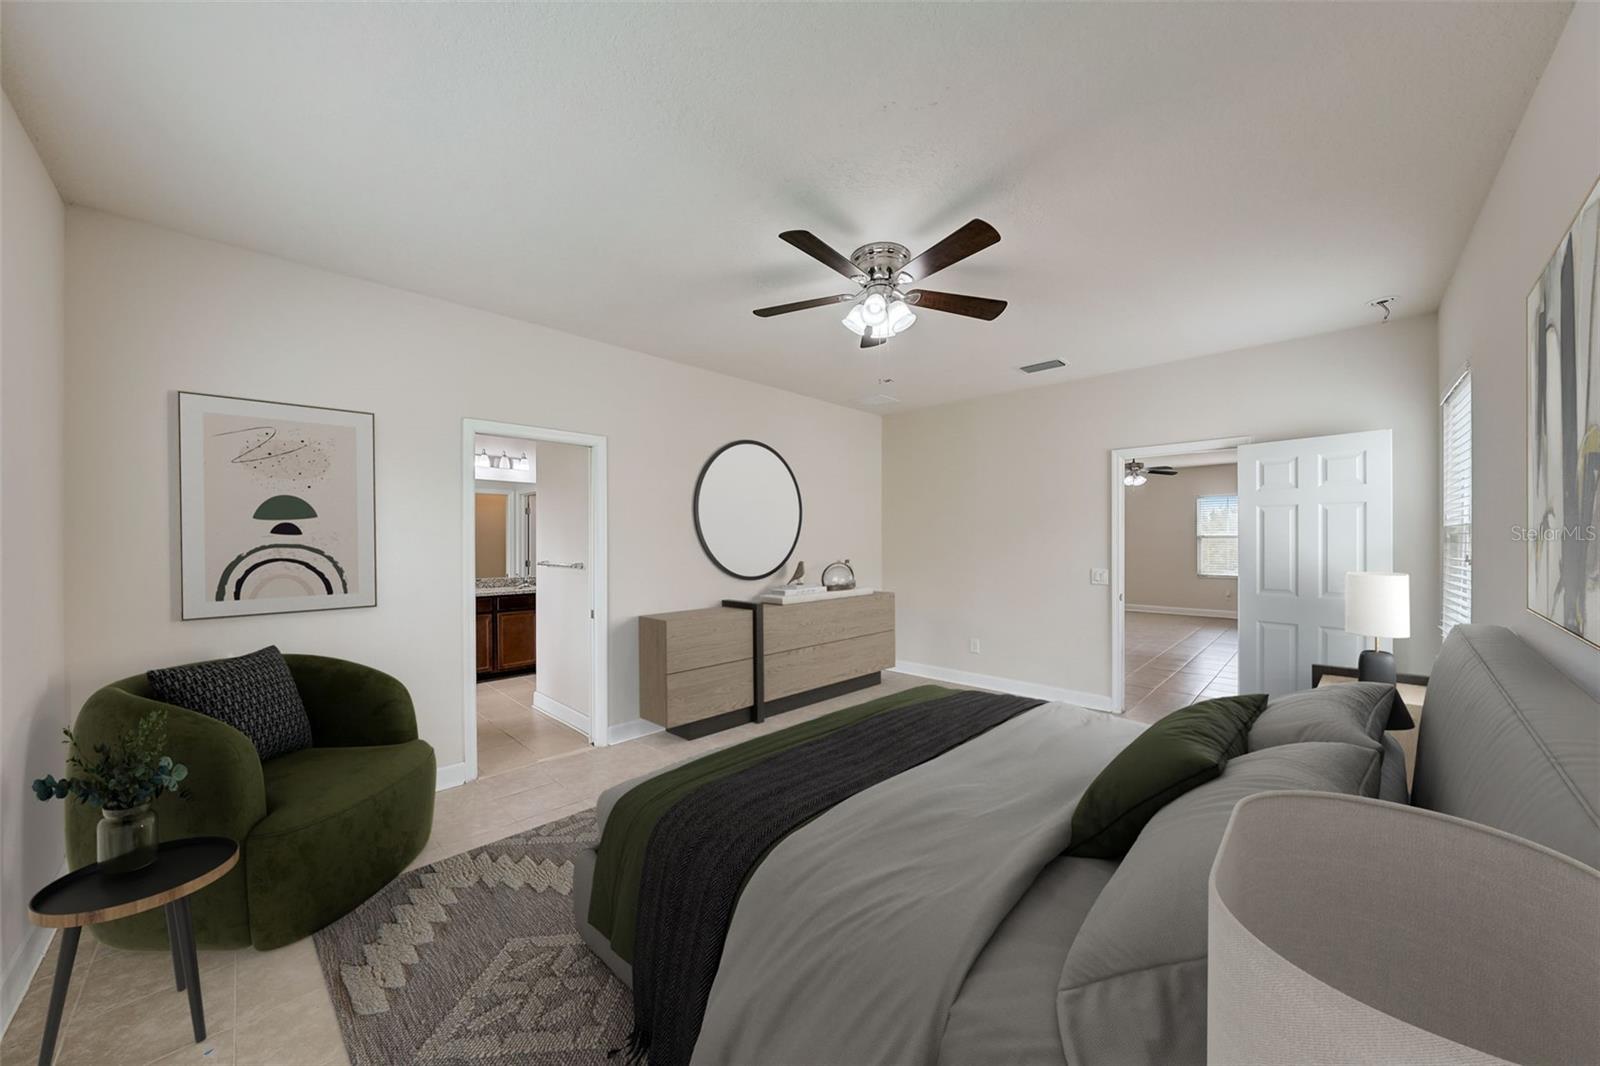 Primary bedroom virtual staging